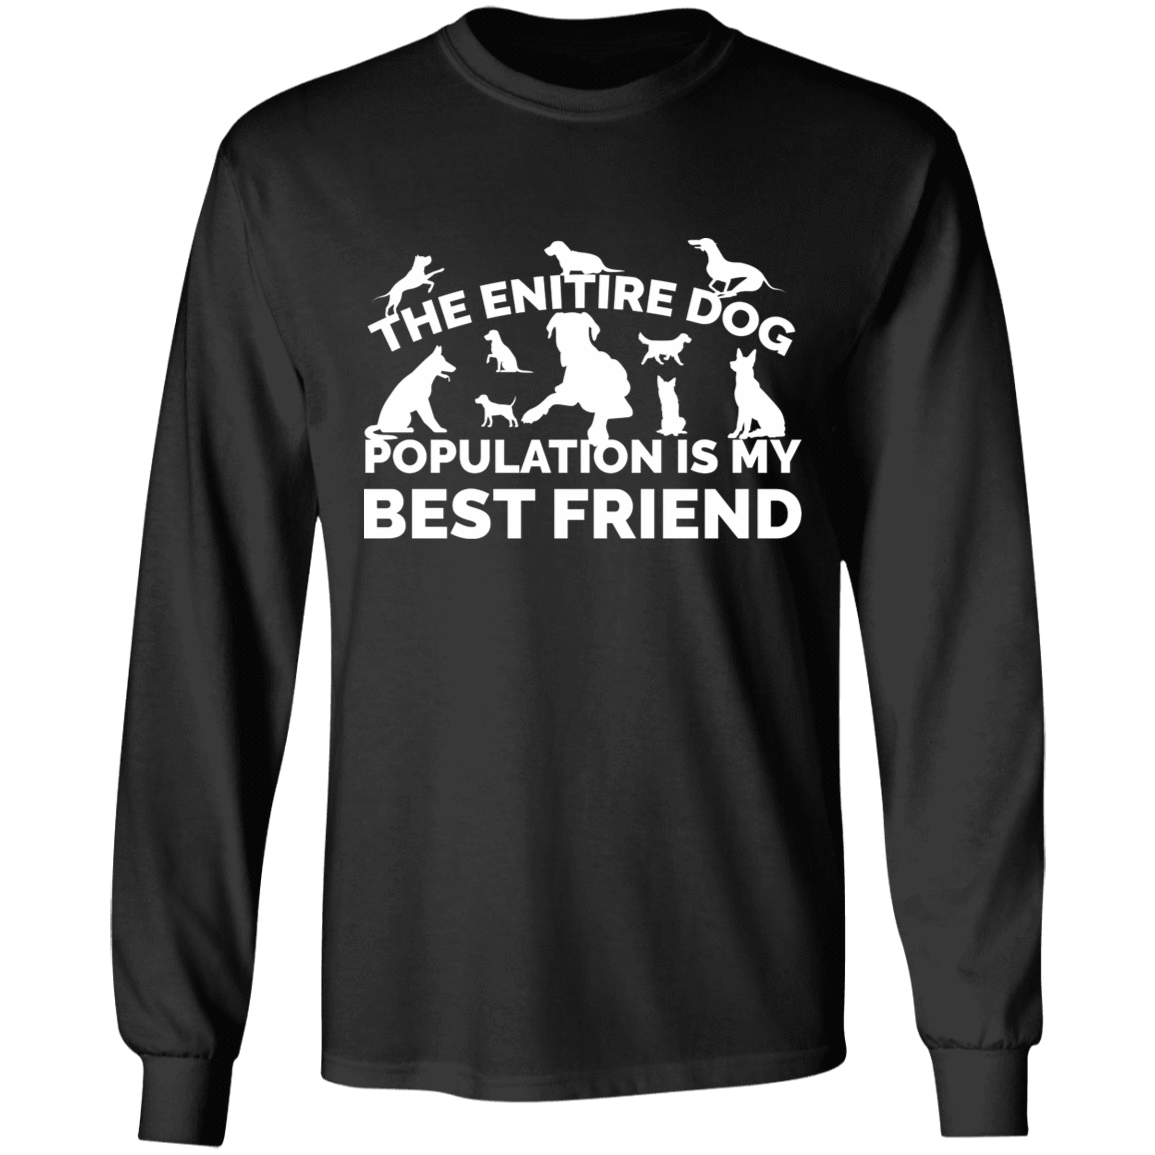 The Entire Dog Population - Long Sleeve T Shirt.